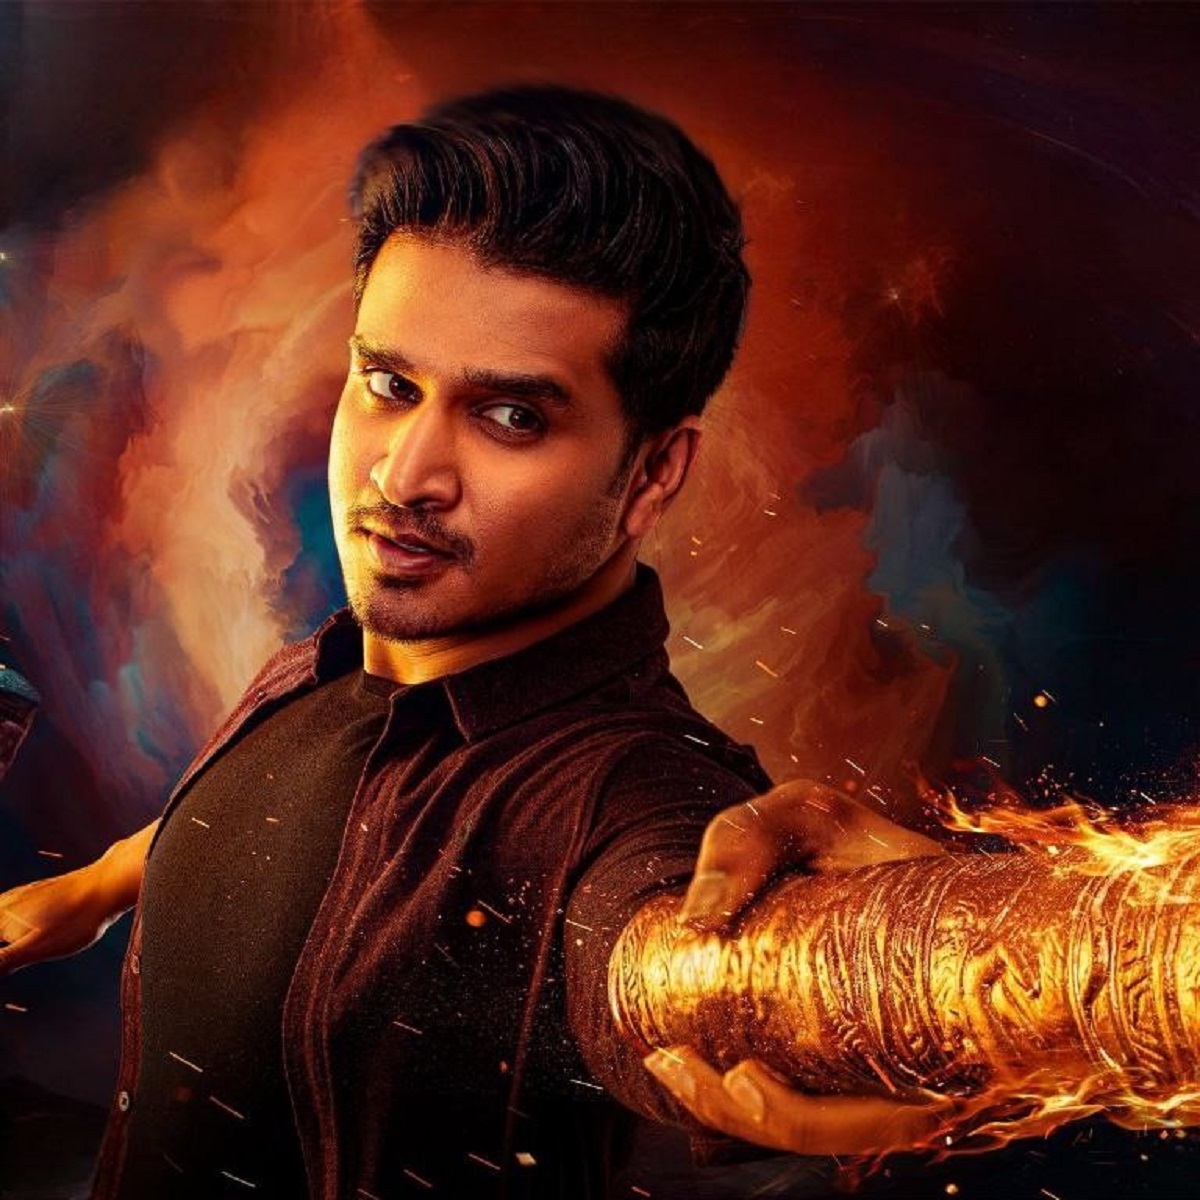 Karthikeya 2 box office collections; Second weekend bigger than First, Surpass Rs. 50 crores in India